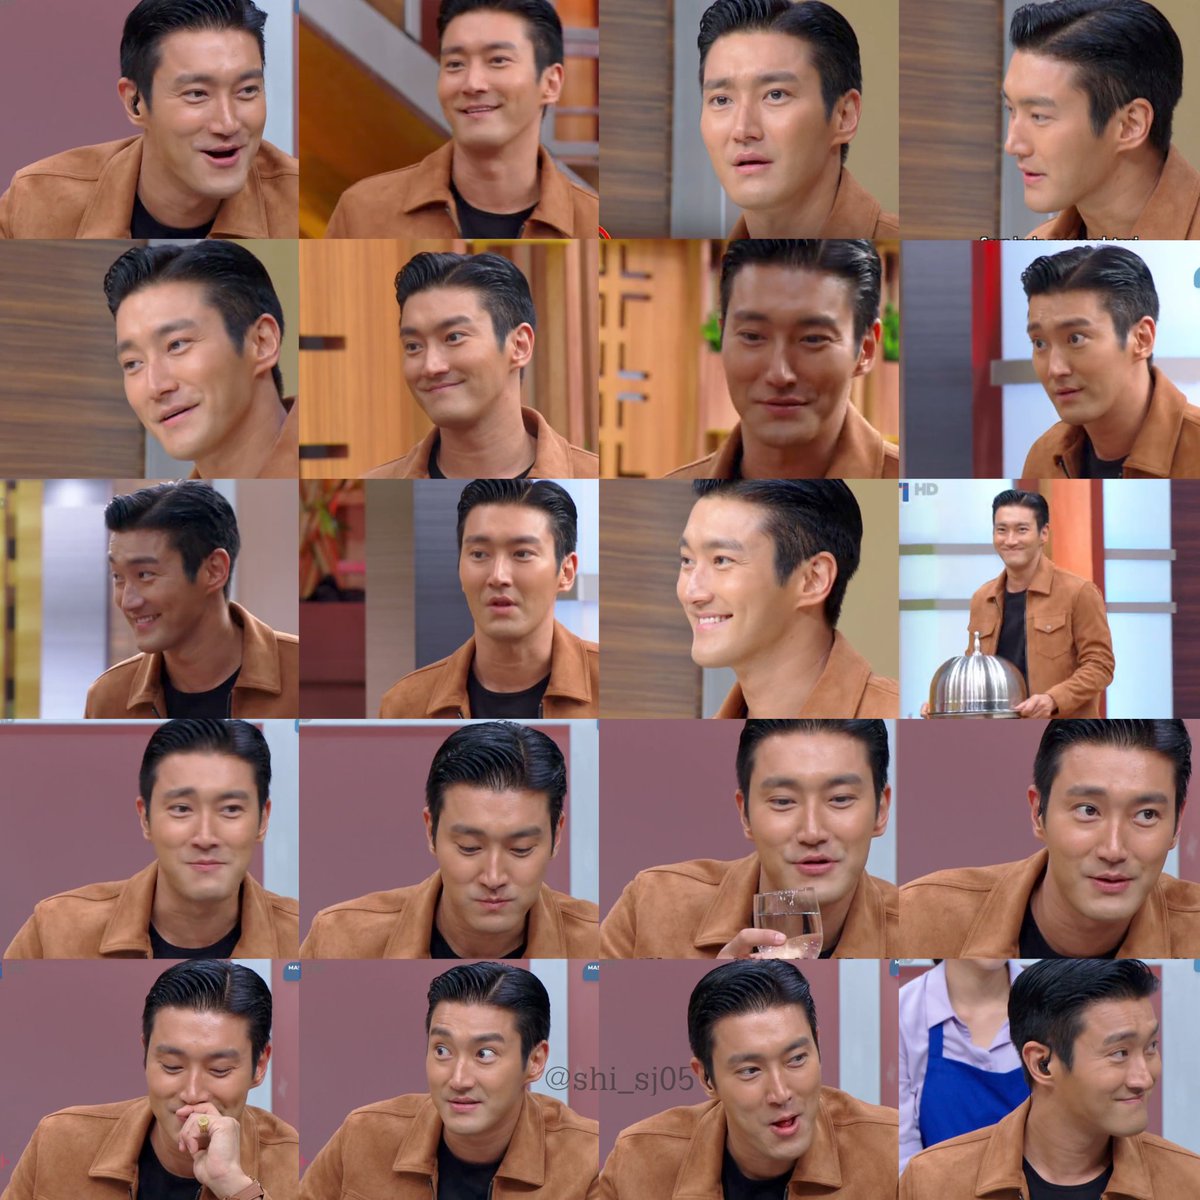 My king of cute facial expressions!

#SIWON
#최시원
#MasterChefIndonesia